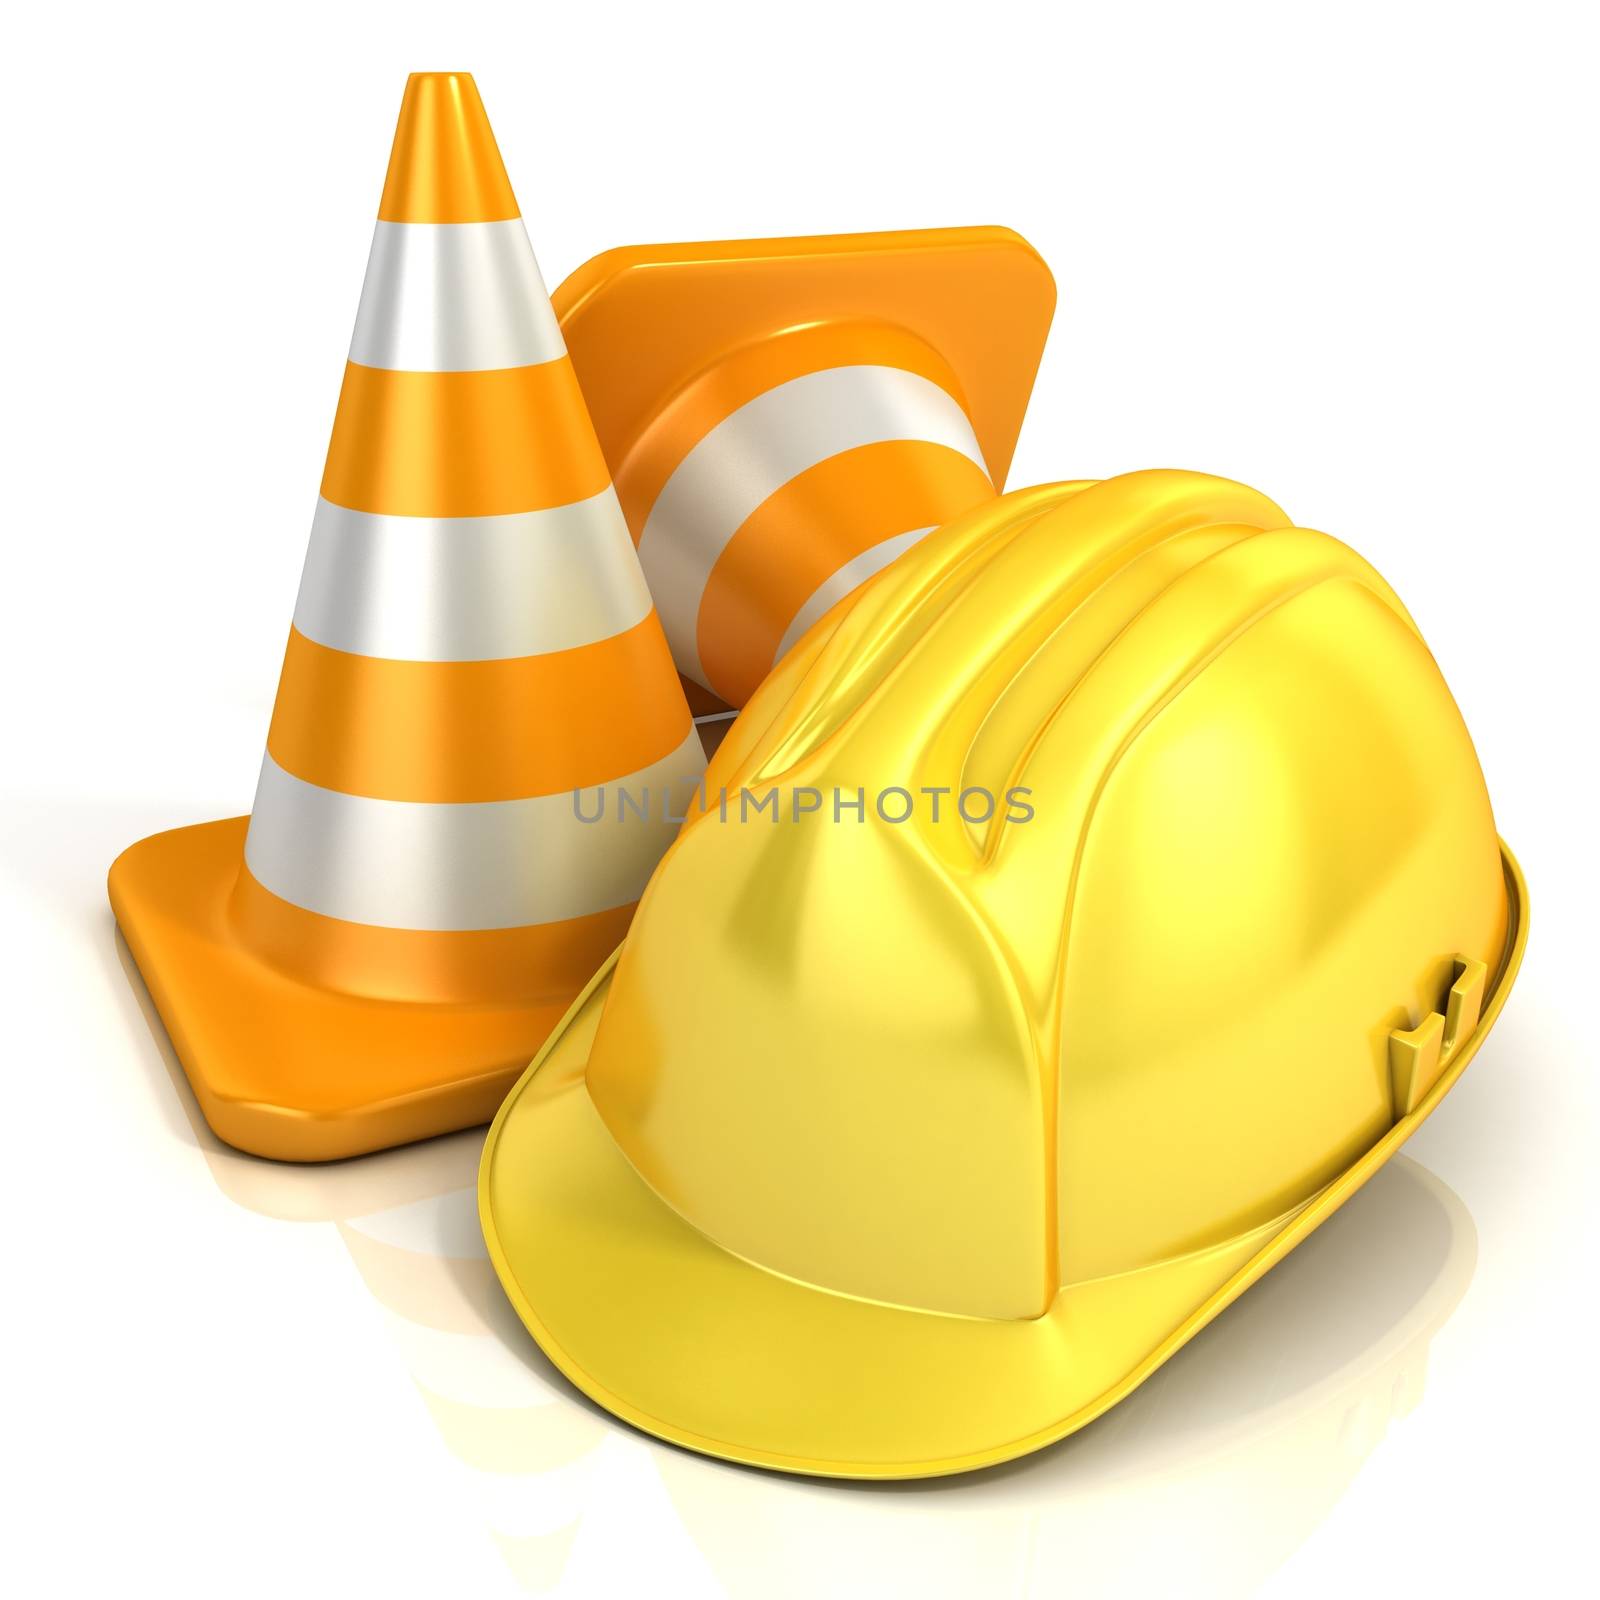 Traffic cones and safety helmet by djmilic